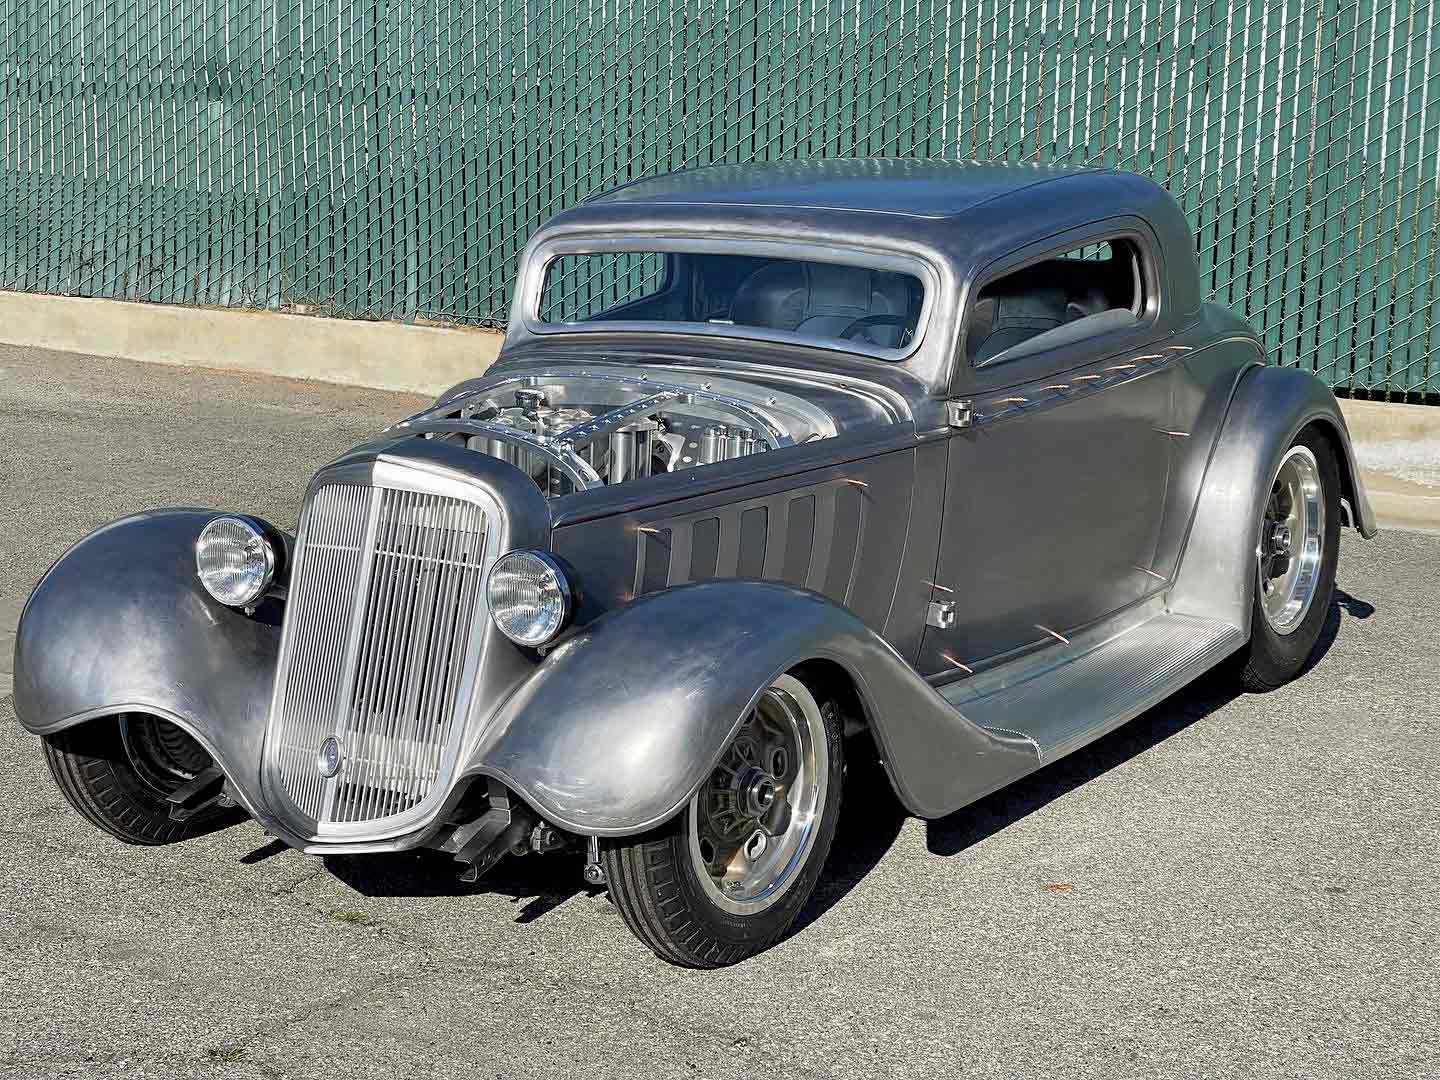 '35 chevy ready for paint